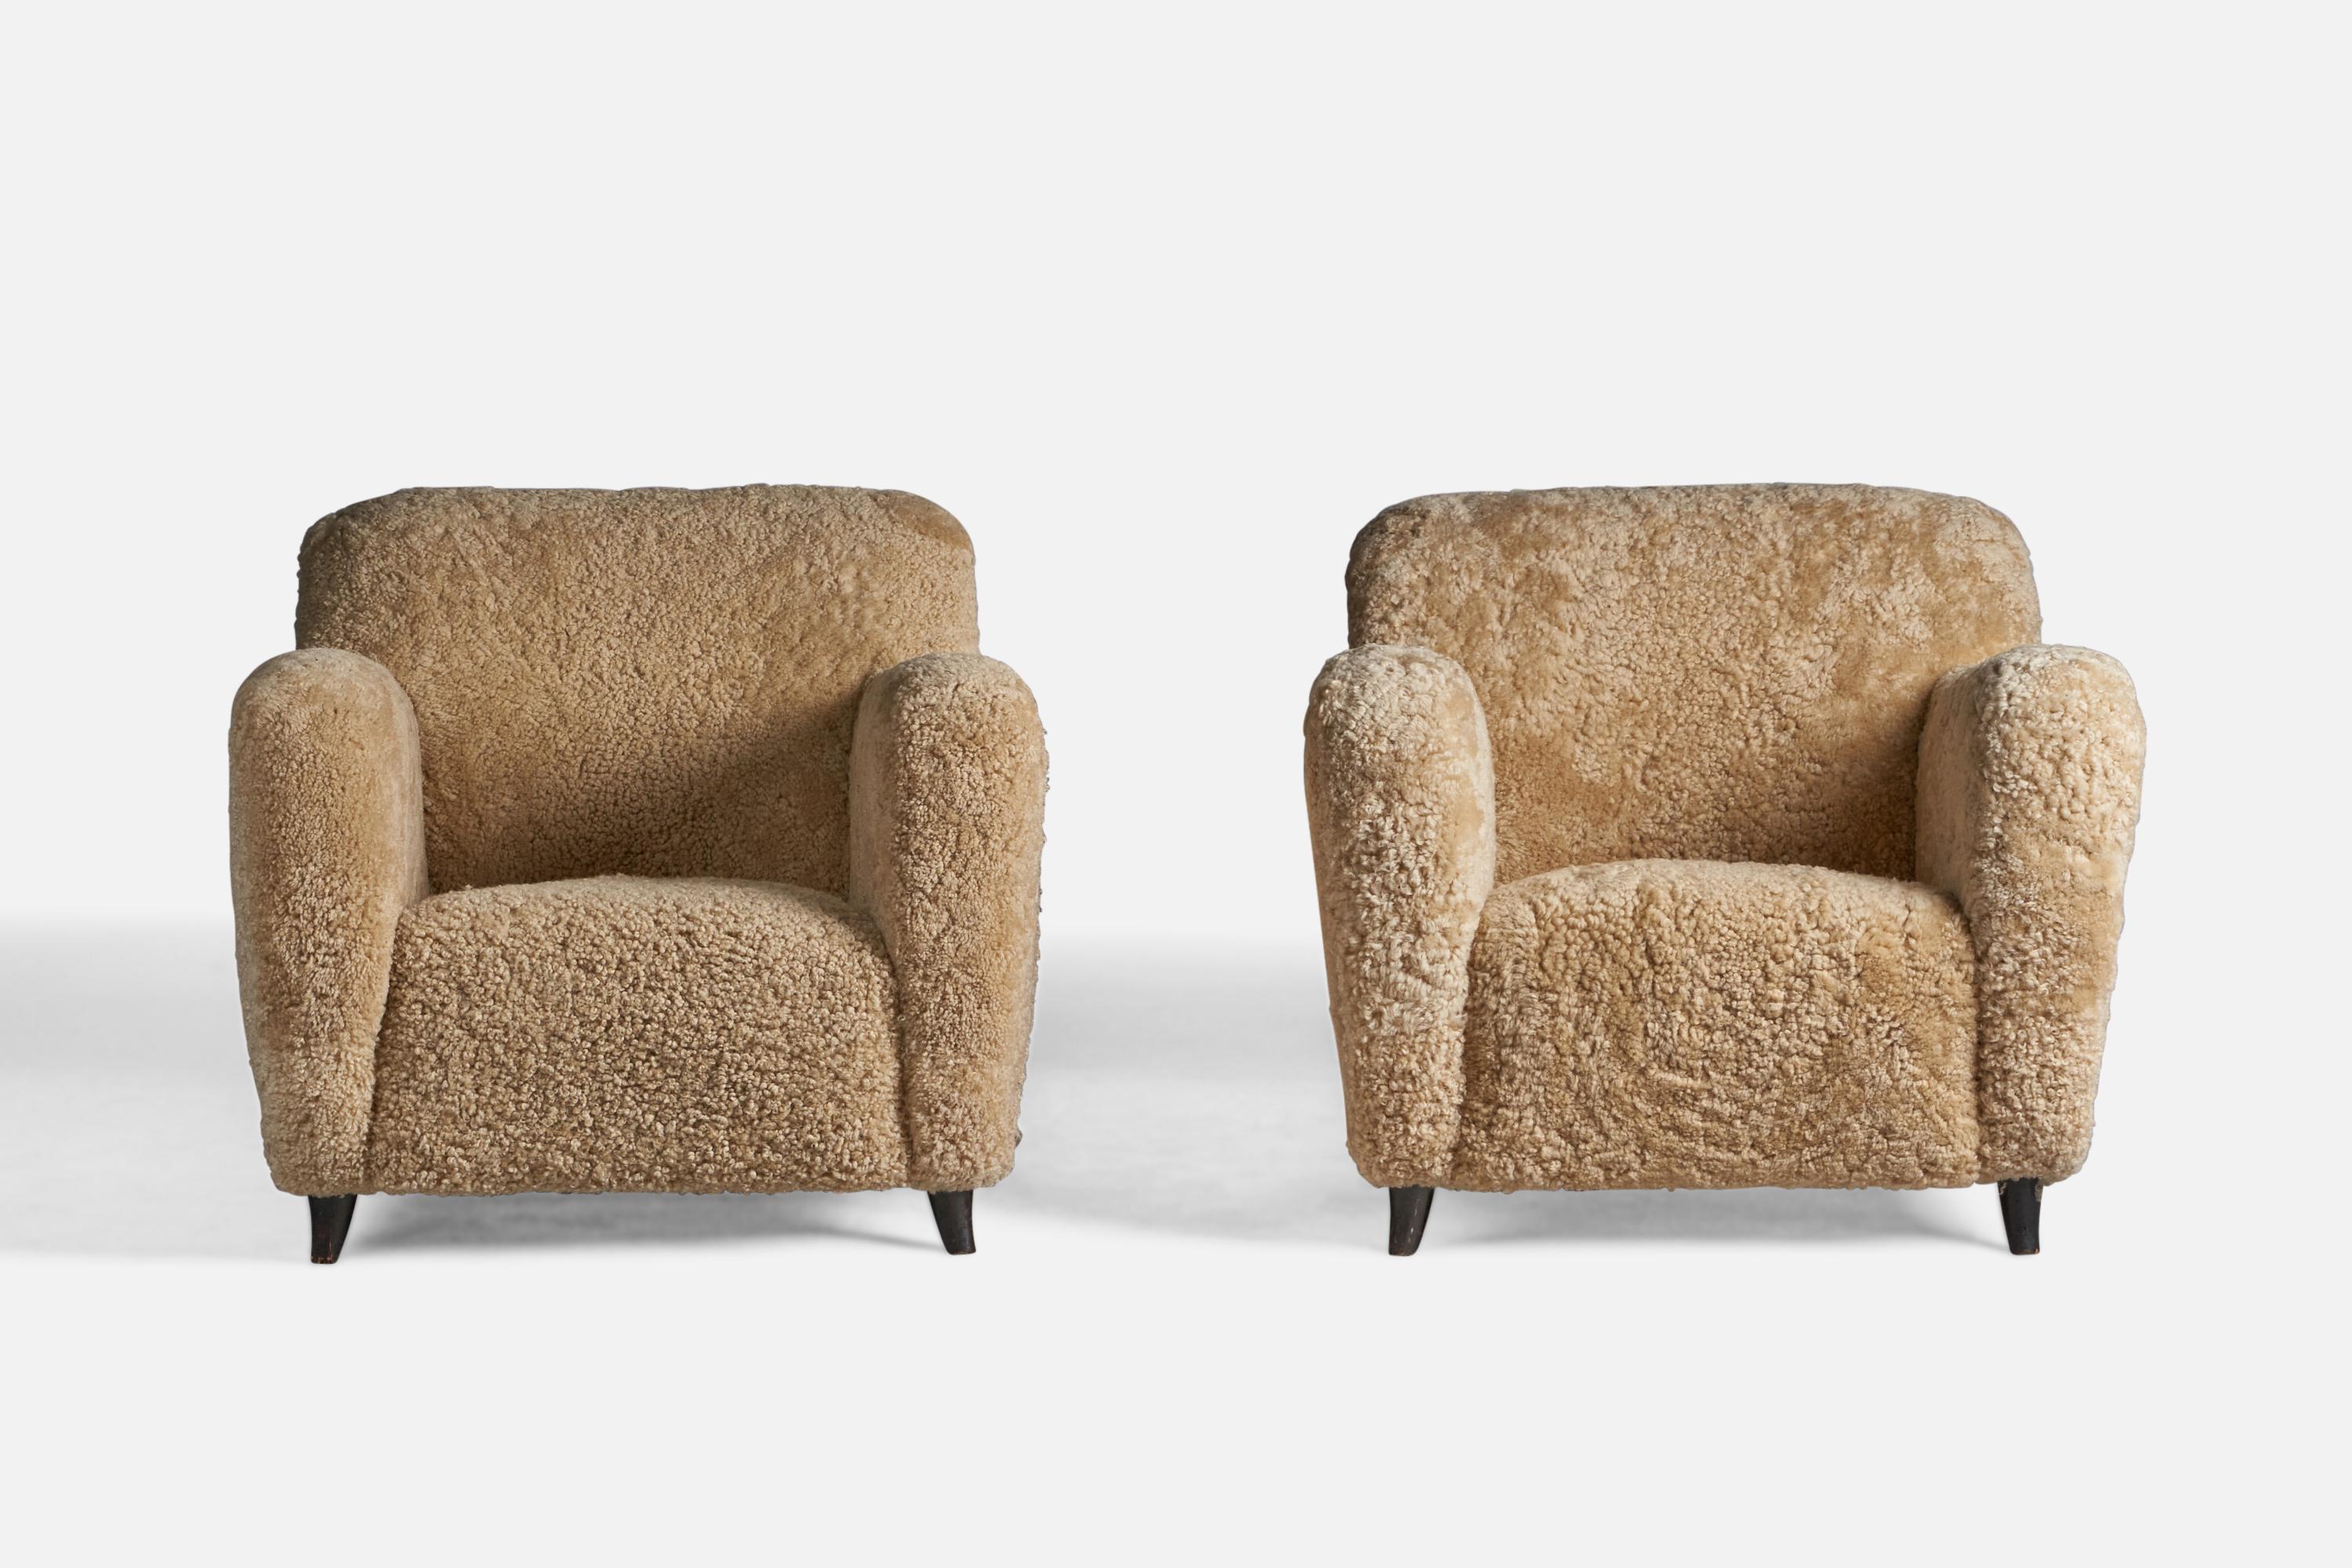 Organic Modern Melchiore Bega Attribution, Lounge Chairs, Shearling, Wood, Italy, 1940s For Sale